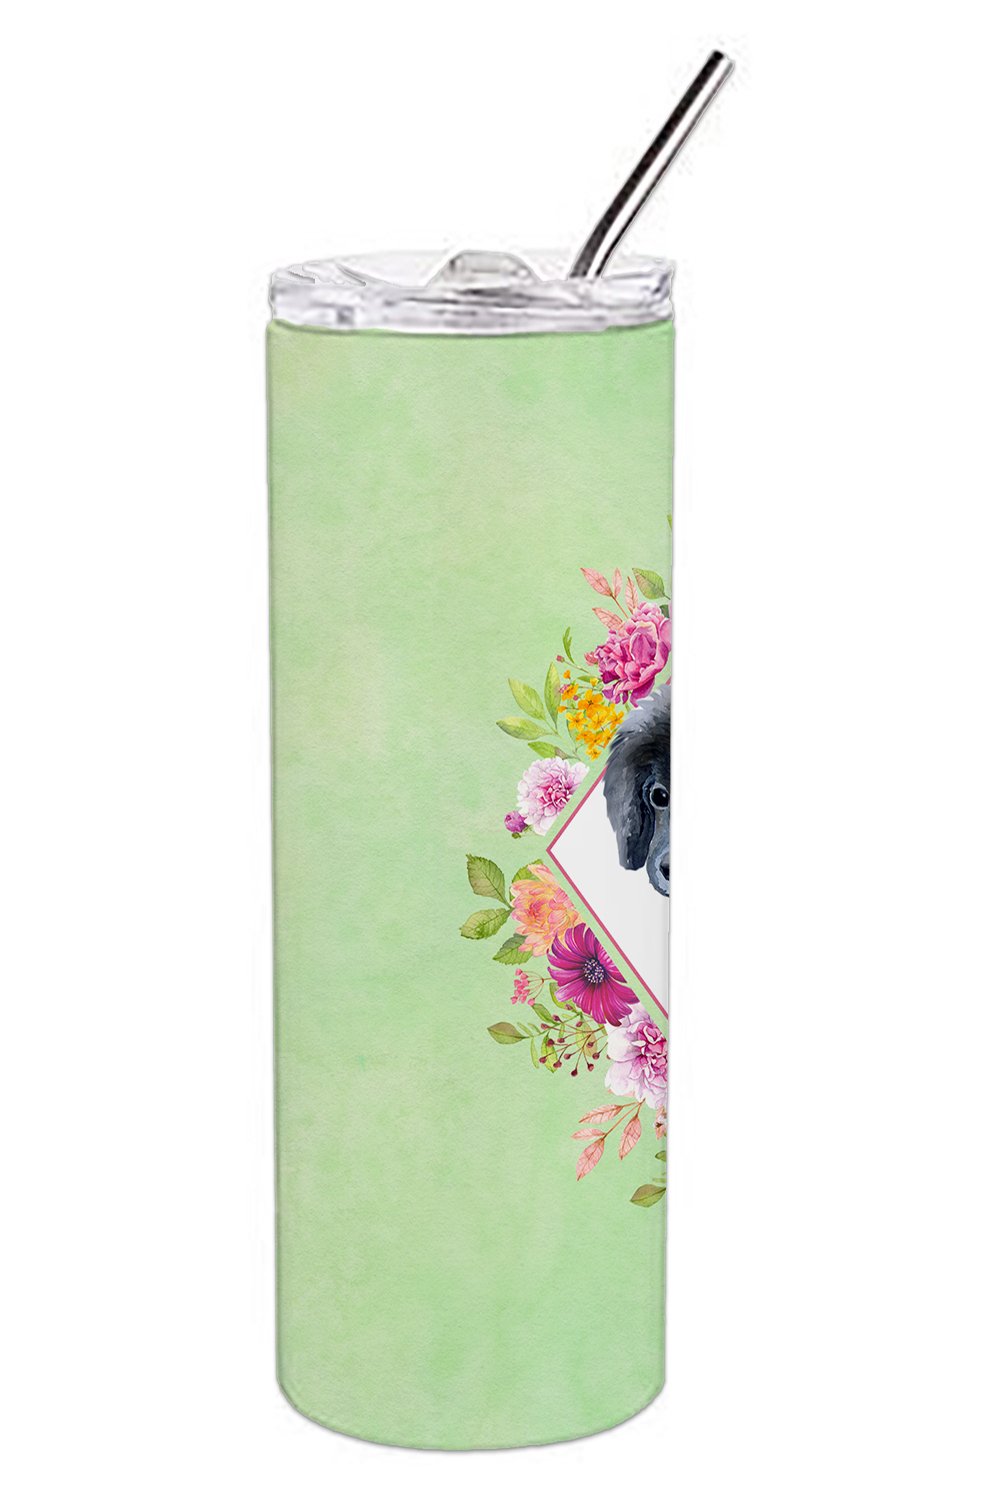 Newfoundland Puppy Green Flowers Double Walled Stainless Steel 20 oz Skinny Tumbler CK4324TBL20 by Caroline's Treasures